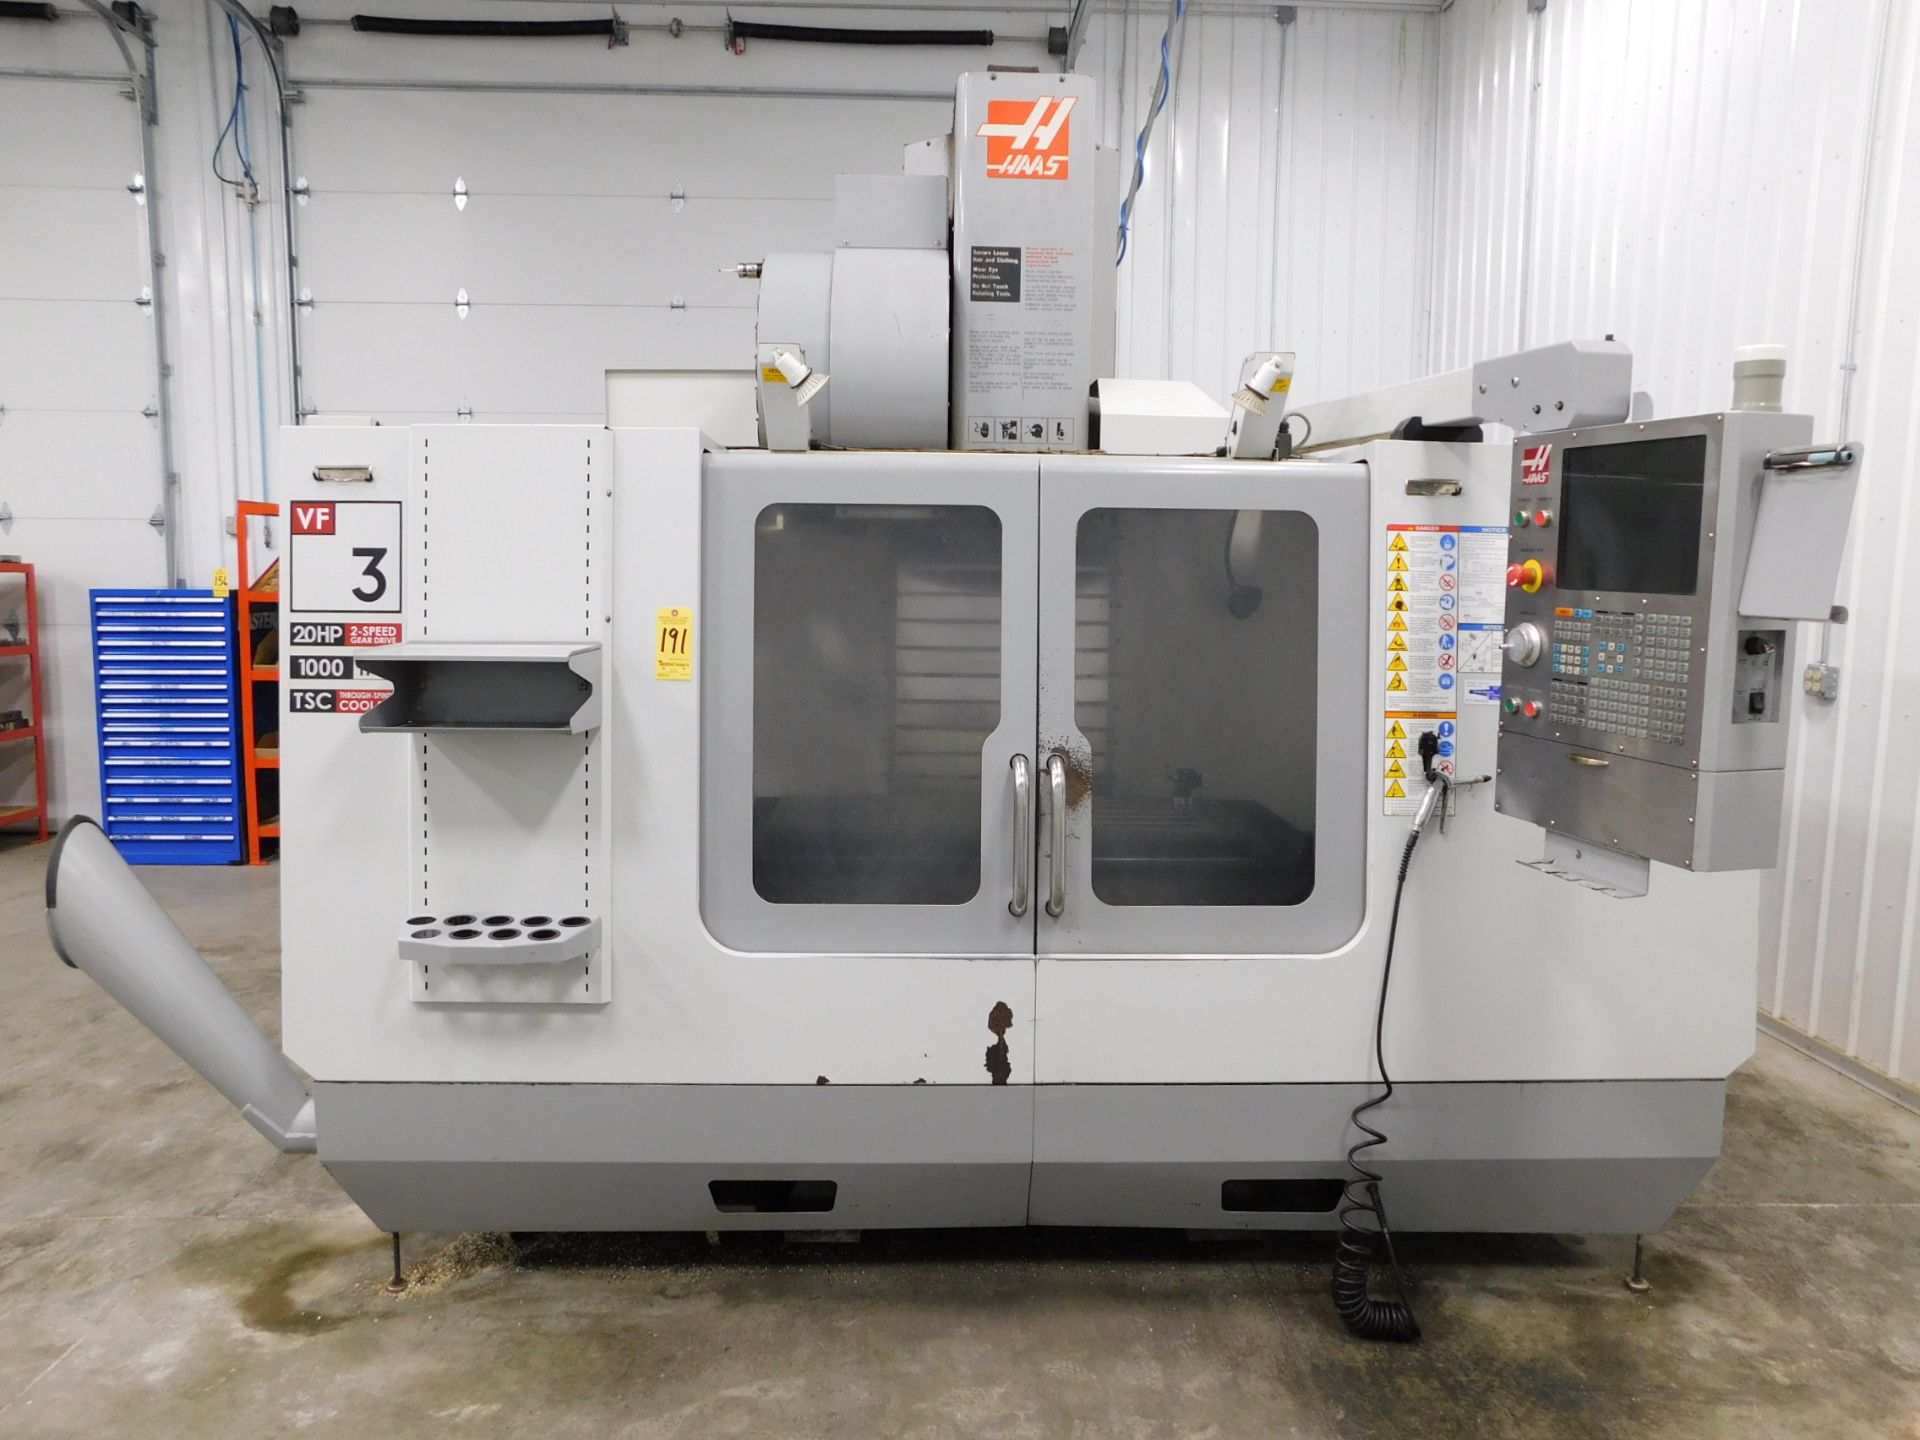 Haas VF-3 Vertical Machining Center sn 1066803, New In 2008, 18"X48" Table, 24ATC, 40Taper